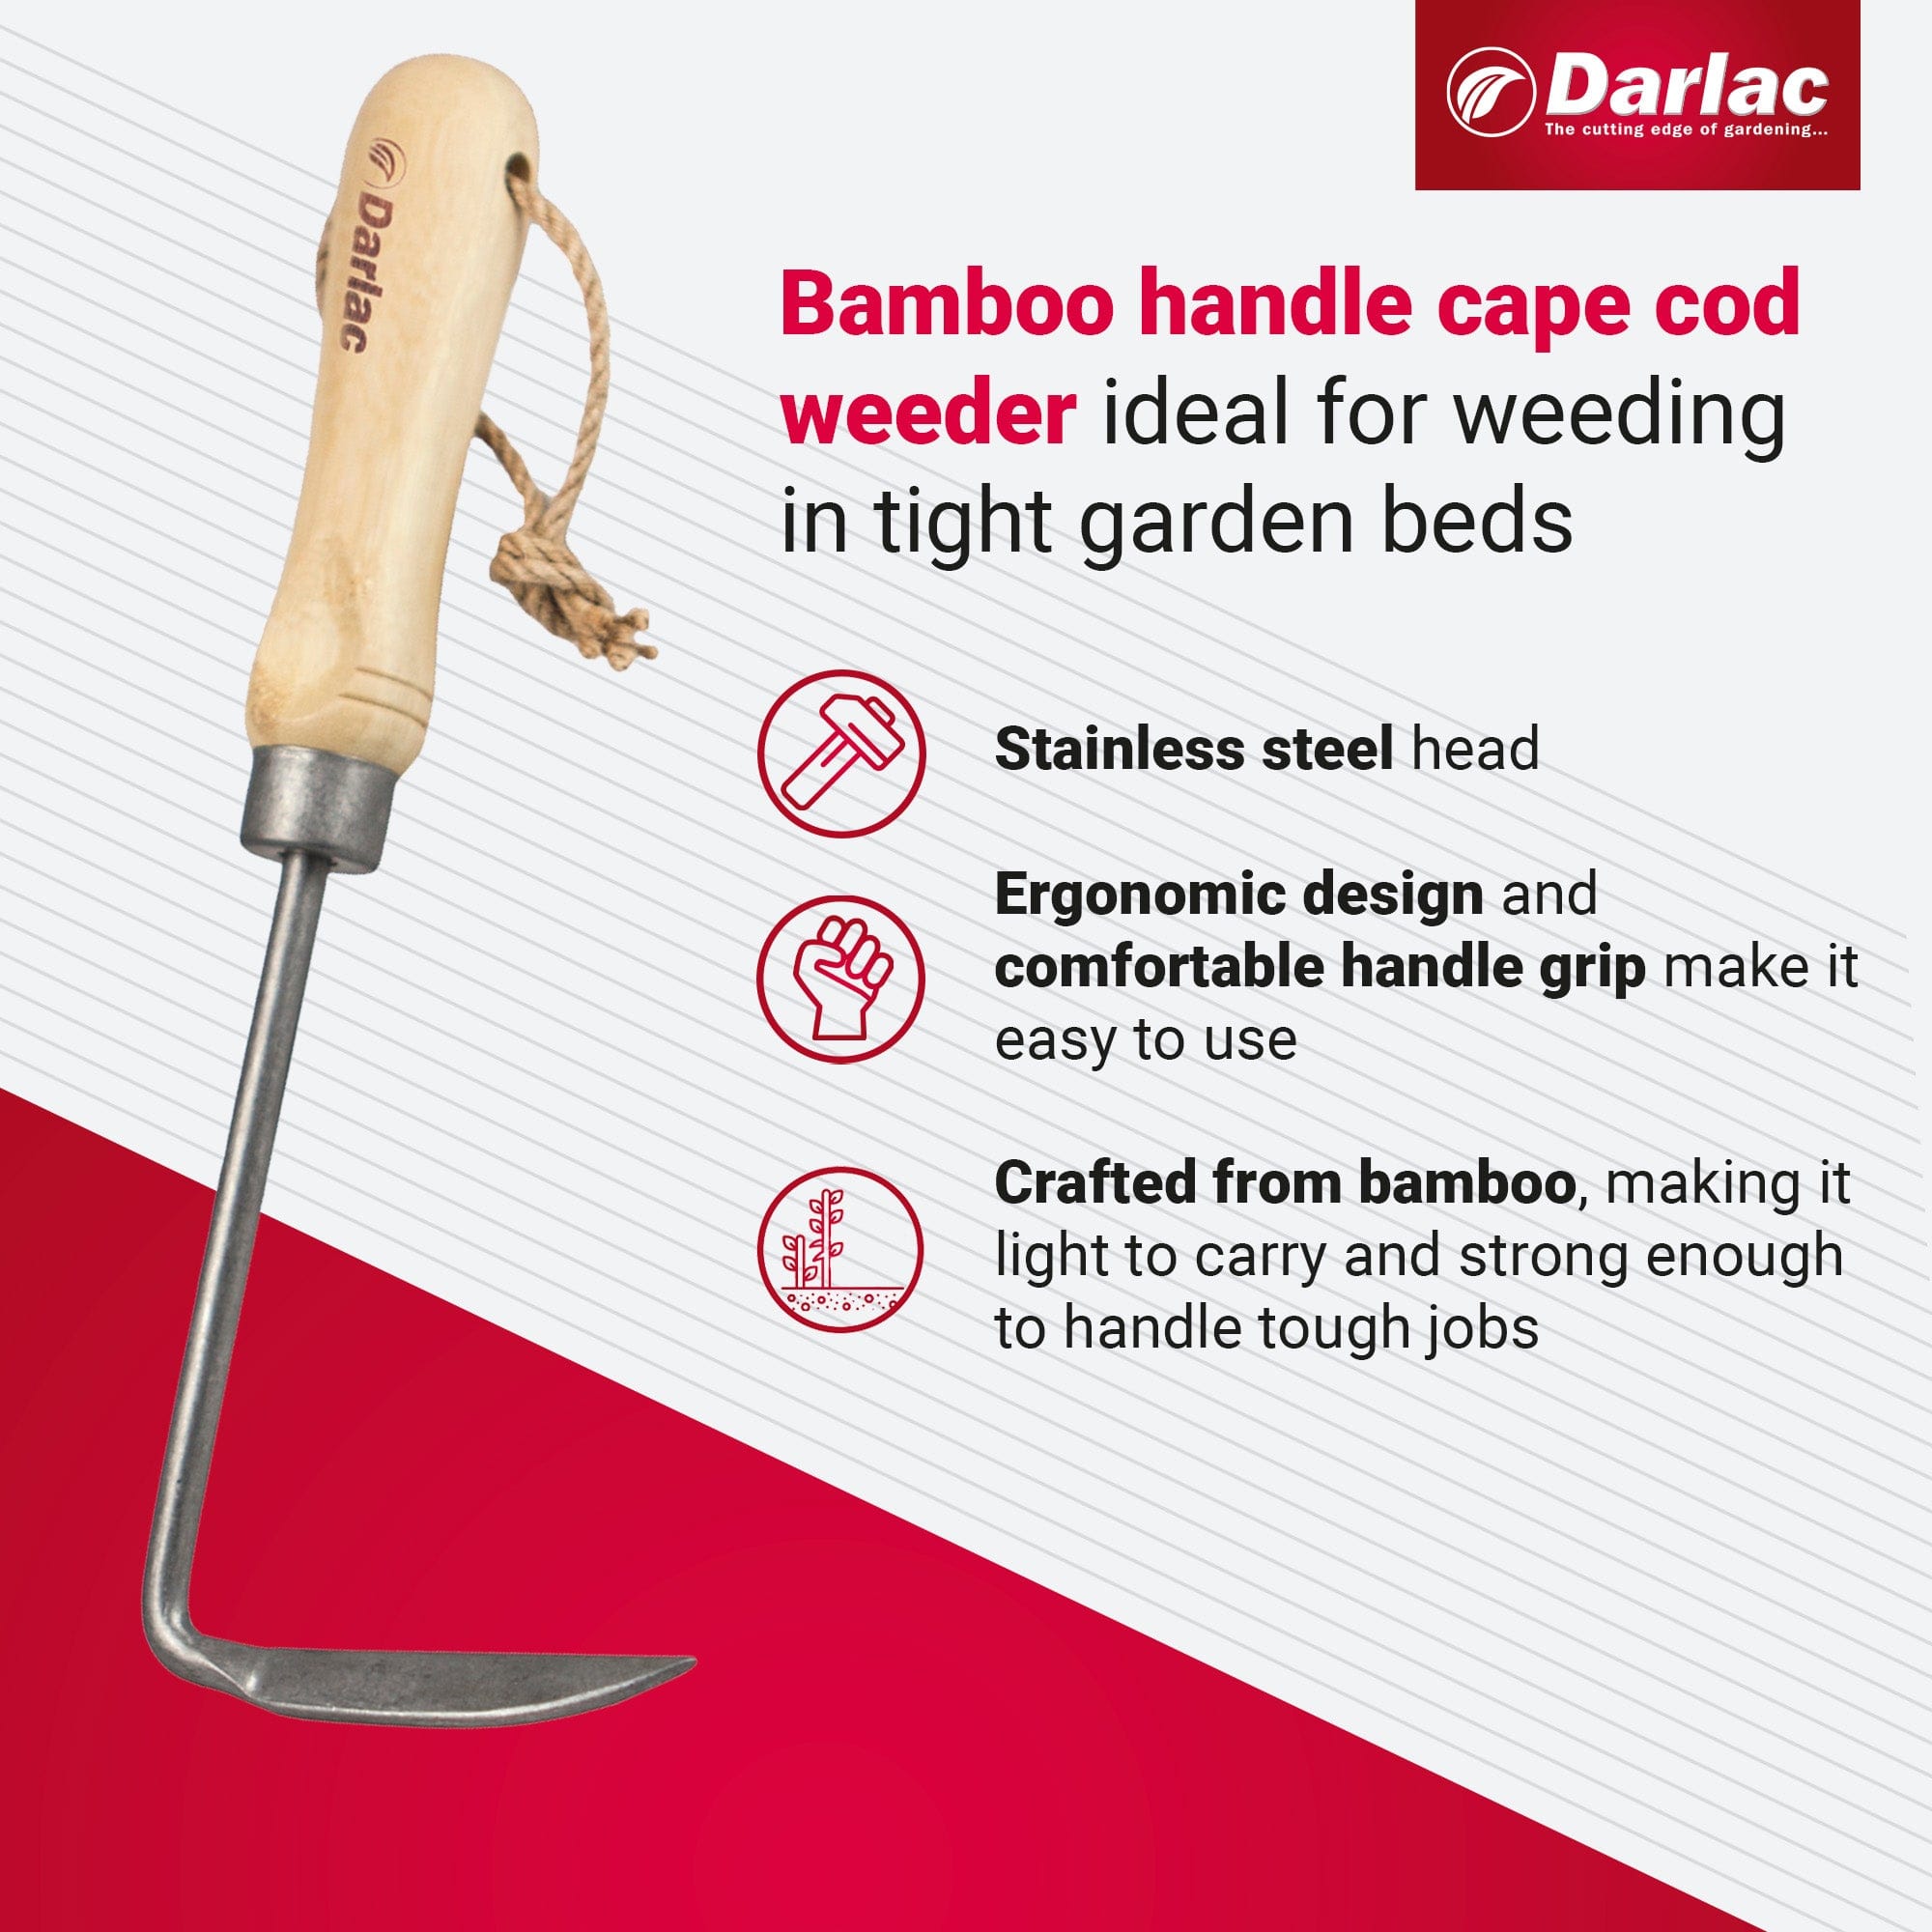 dt-brown HARDWARE Darlac Bamboo Cape Cod Weeder